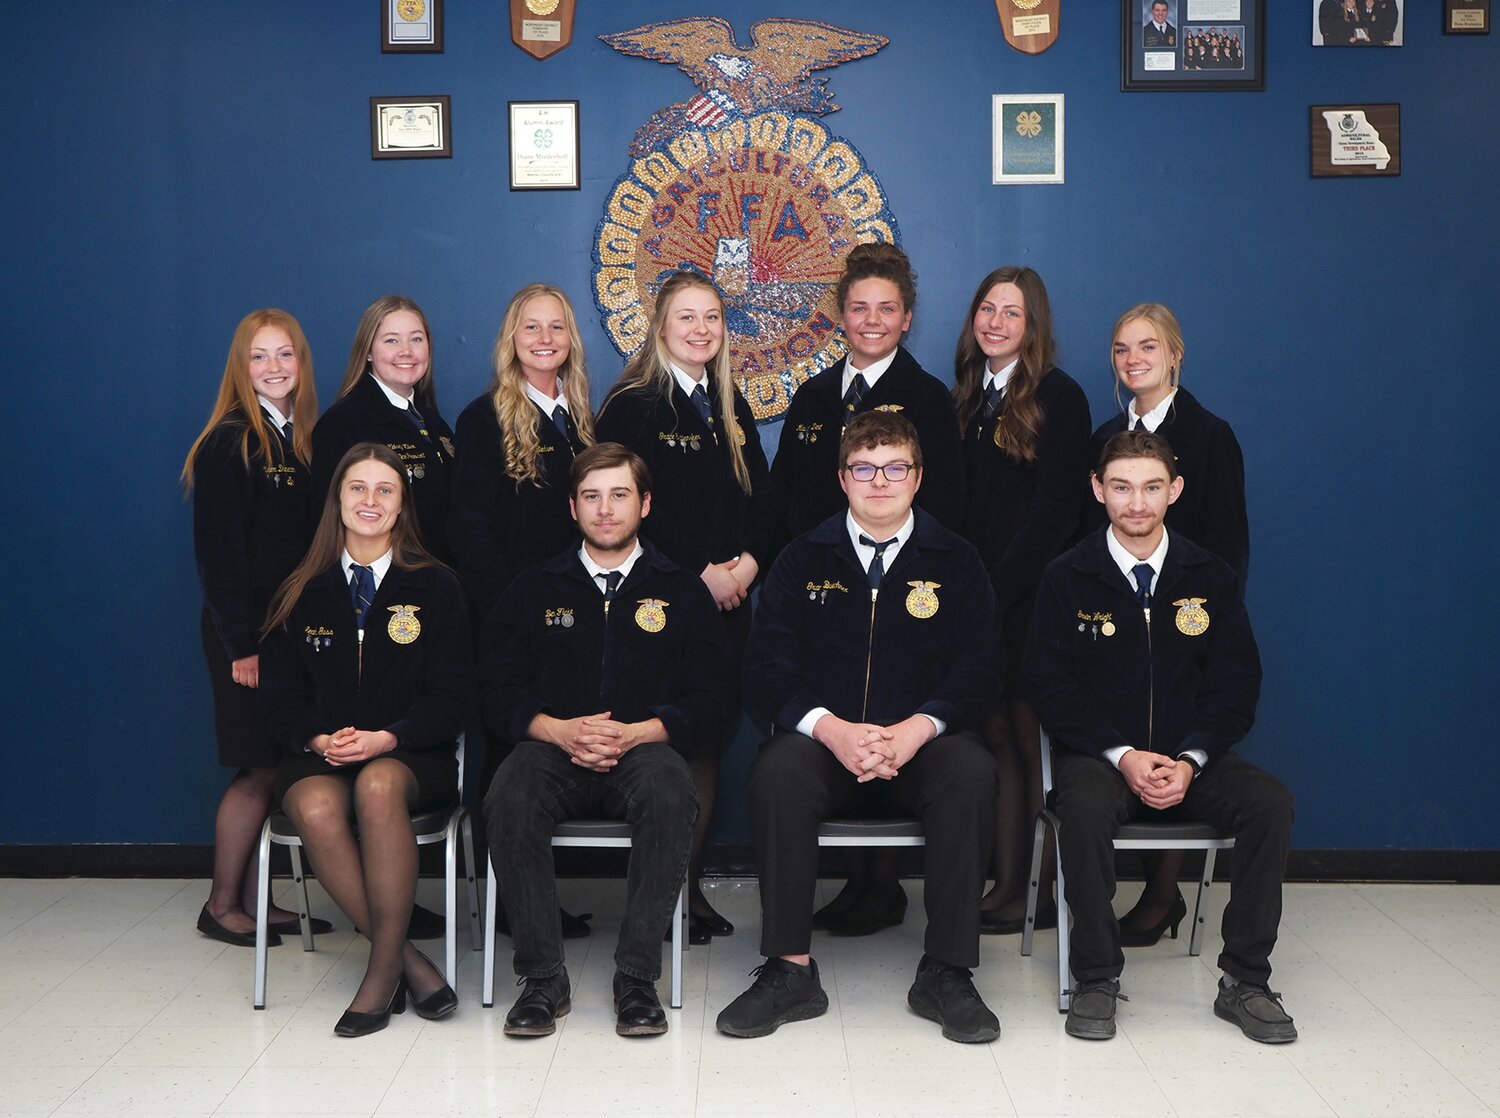 The Warrenton High School FFA Chapter attended the state convention April 20-21 and brought back many state awards. Pictured, bottom row, from left, are Leah Guss, Ben Flake, Grant Buehner and Gavin Wright. Back row: Allison Duncan, Kelsey Miller, Autumn Bledsoe, Grace Schlansker, Madison Dent, Nicole Benne and Bailey Schneider.